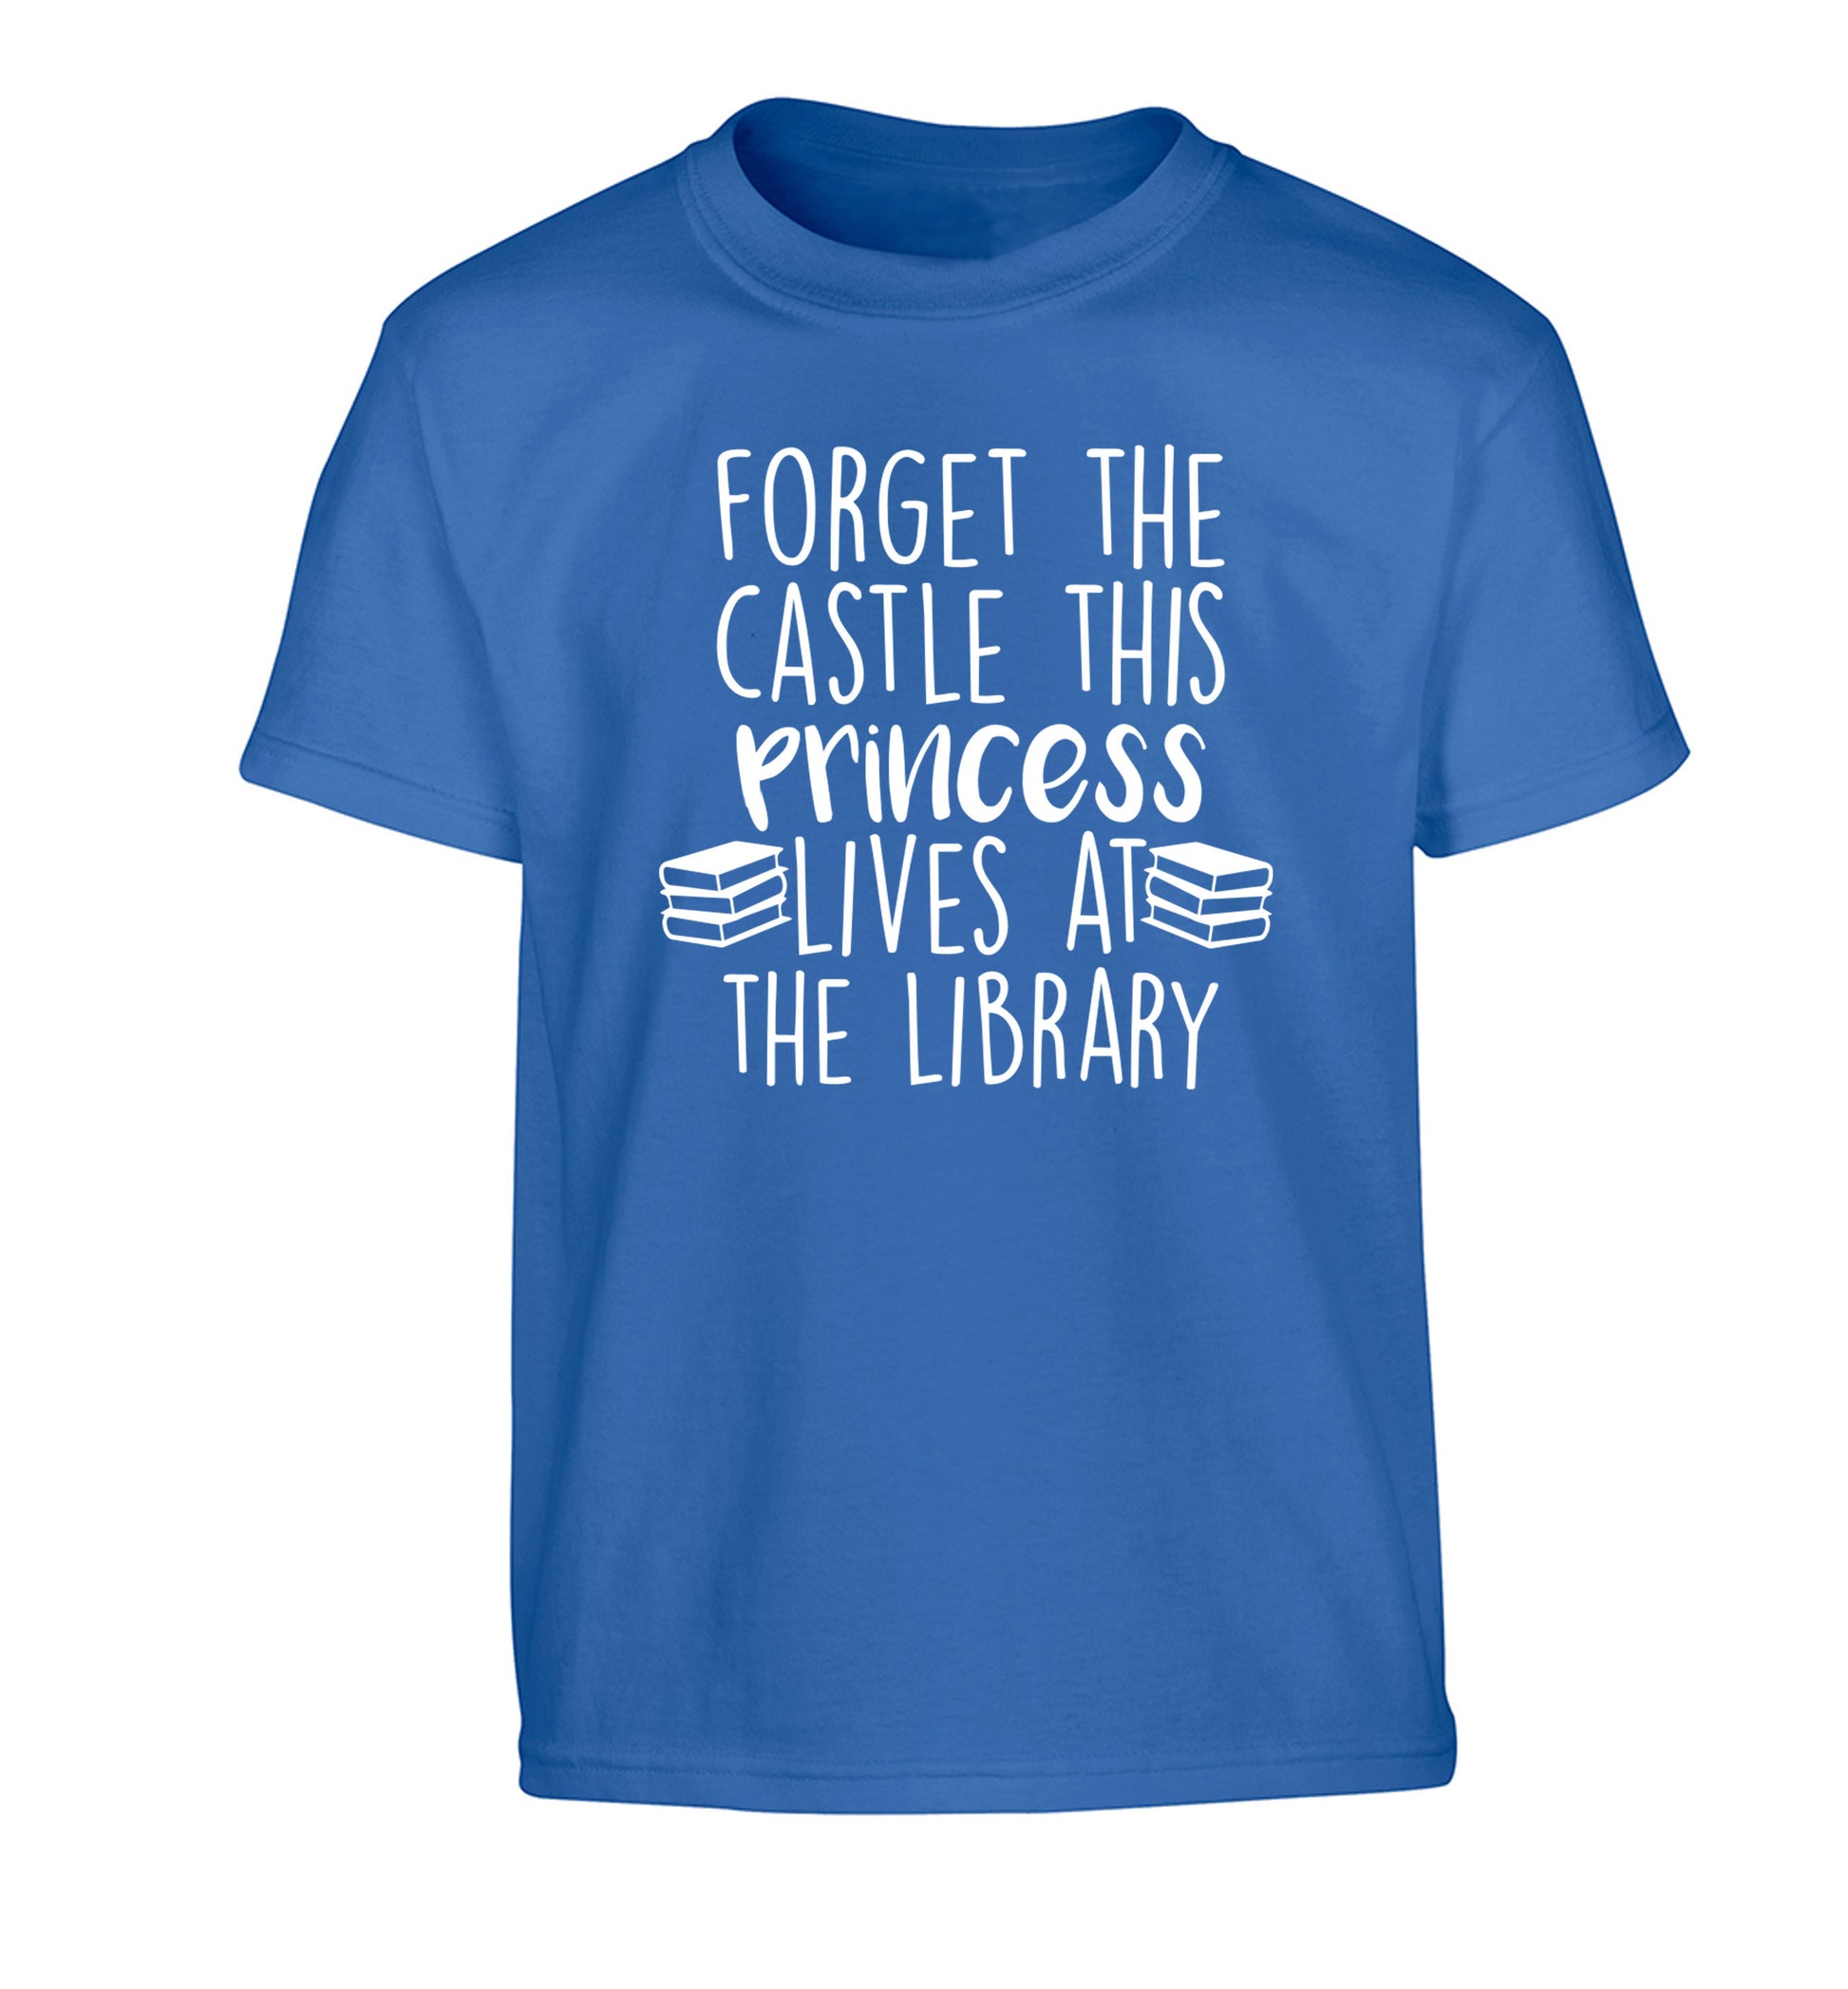 Forget the castle this princess lives at the library Children's blue Tshirt 12-14 Years